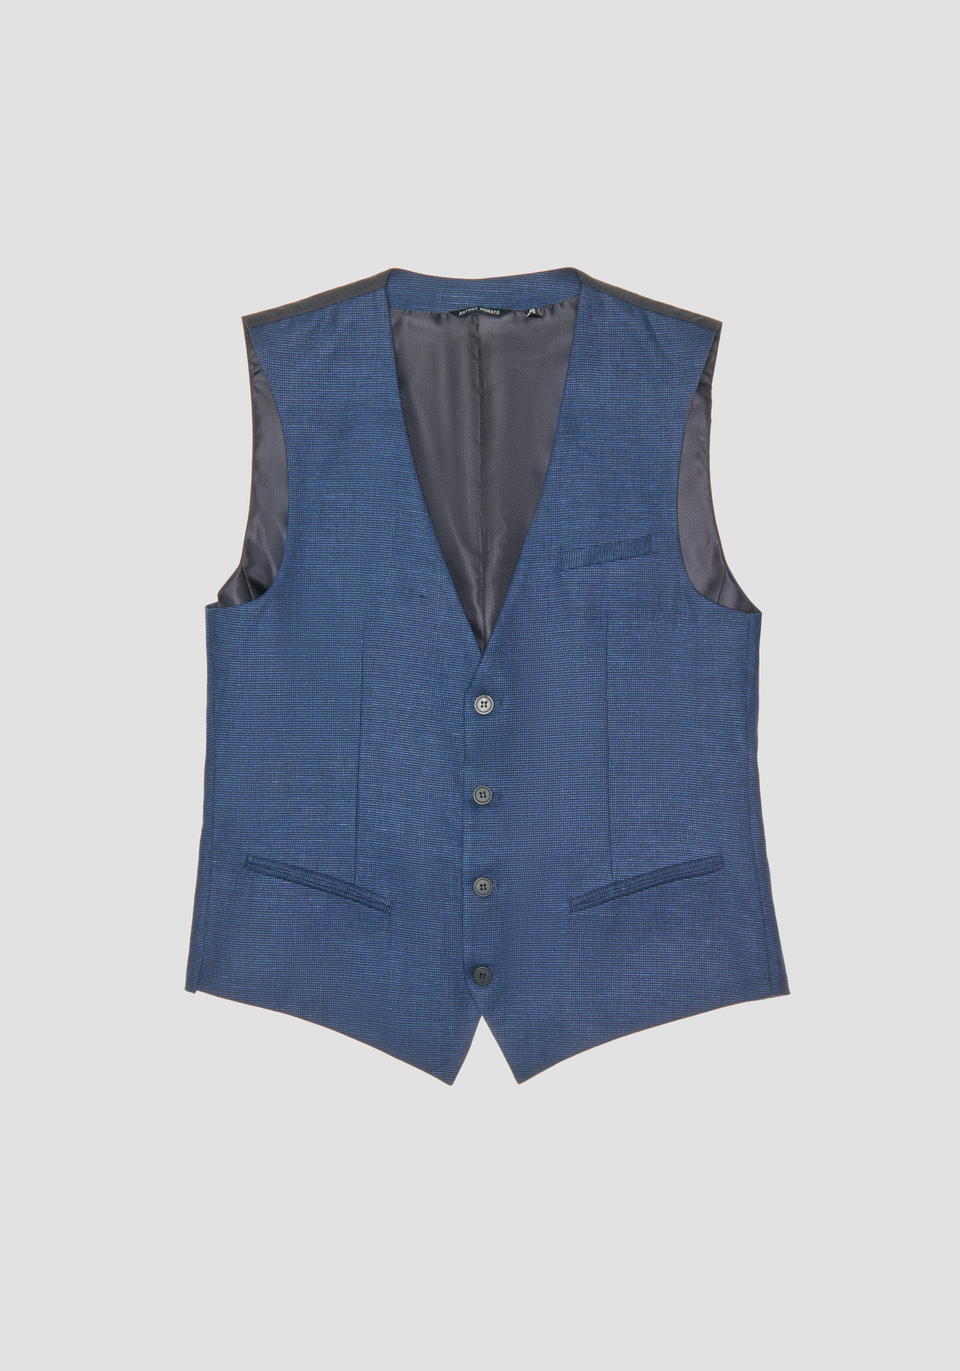 SLIM FIT VEST WITH MICROPATTERN - Antony Morato Online Shop